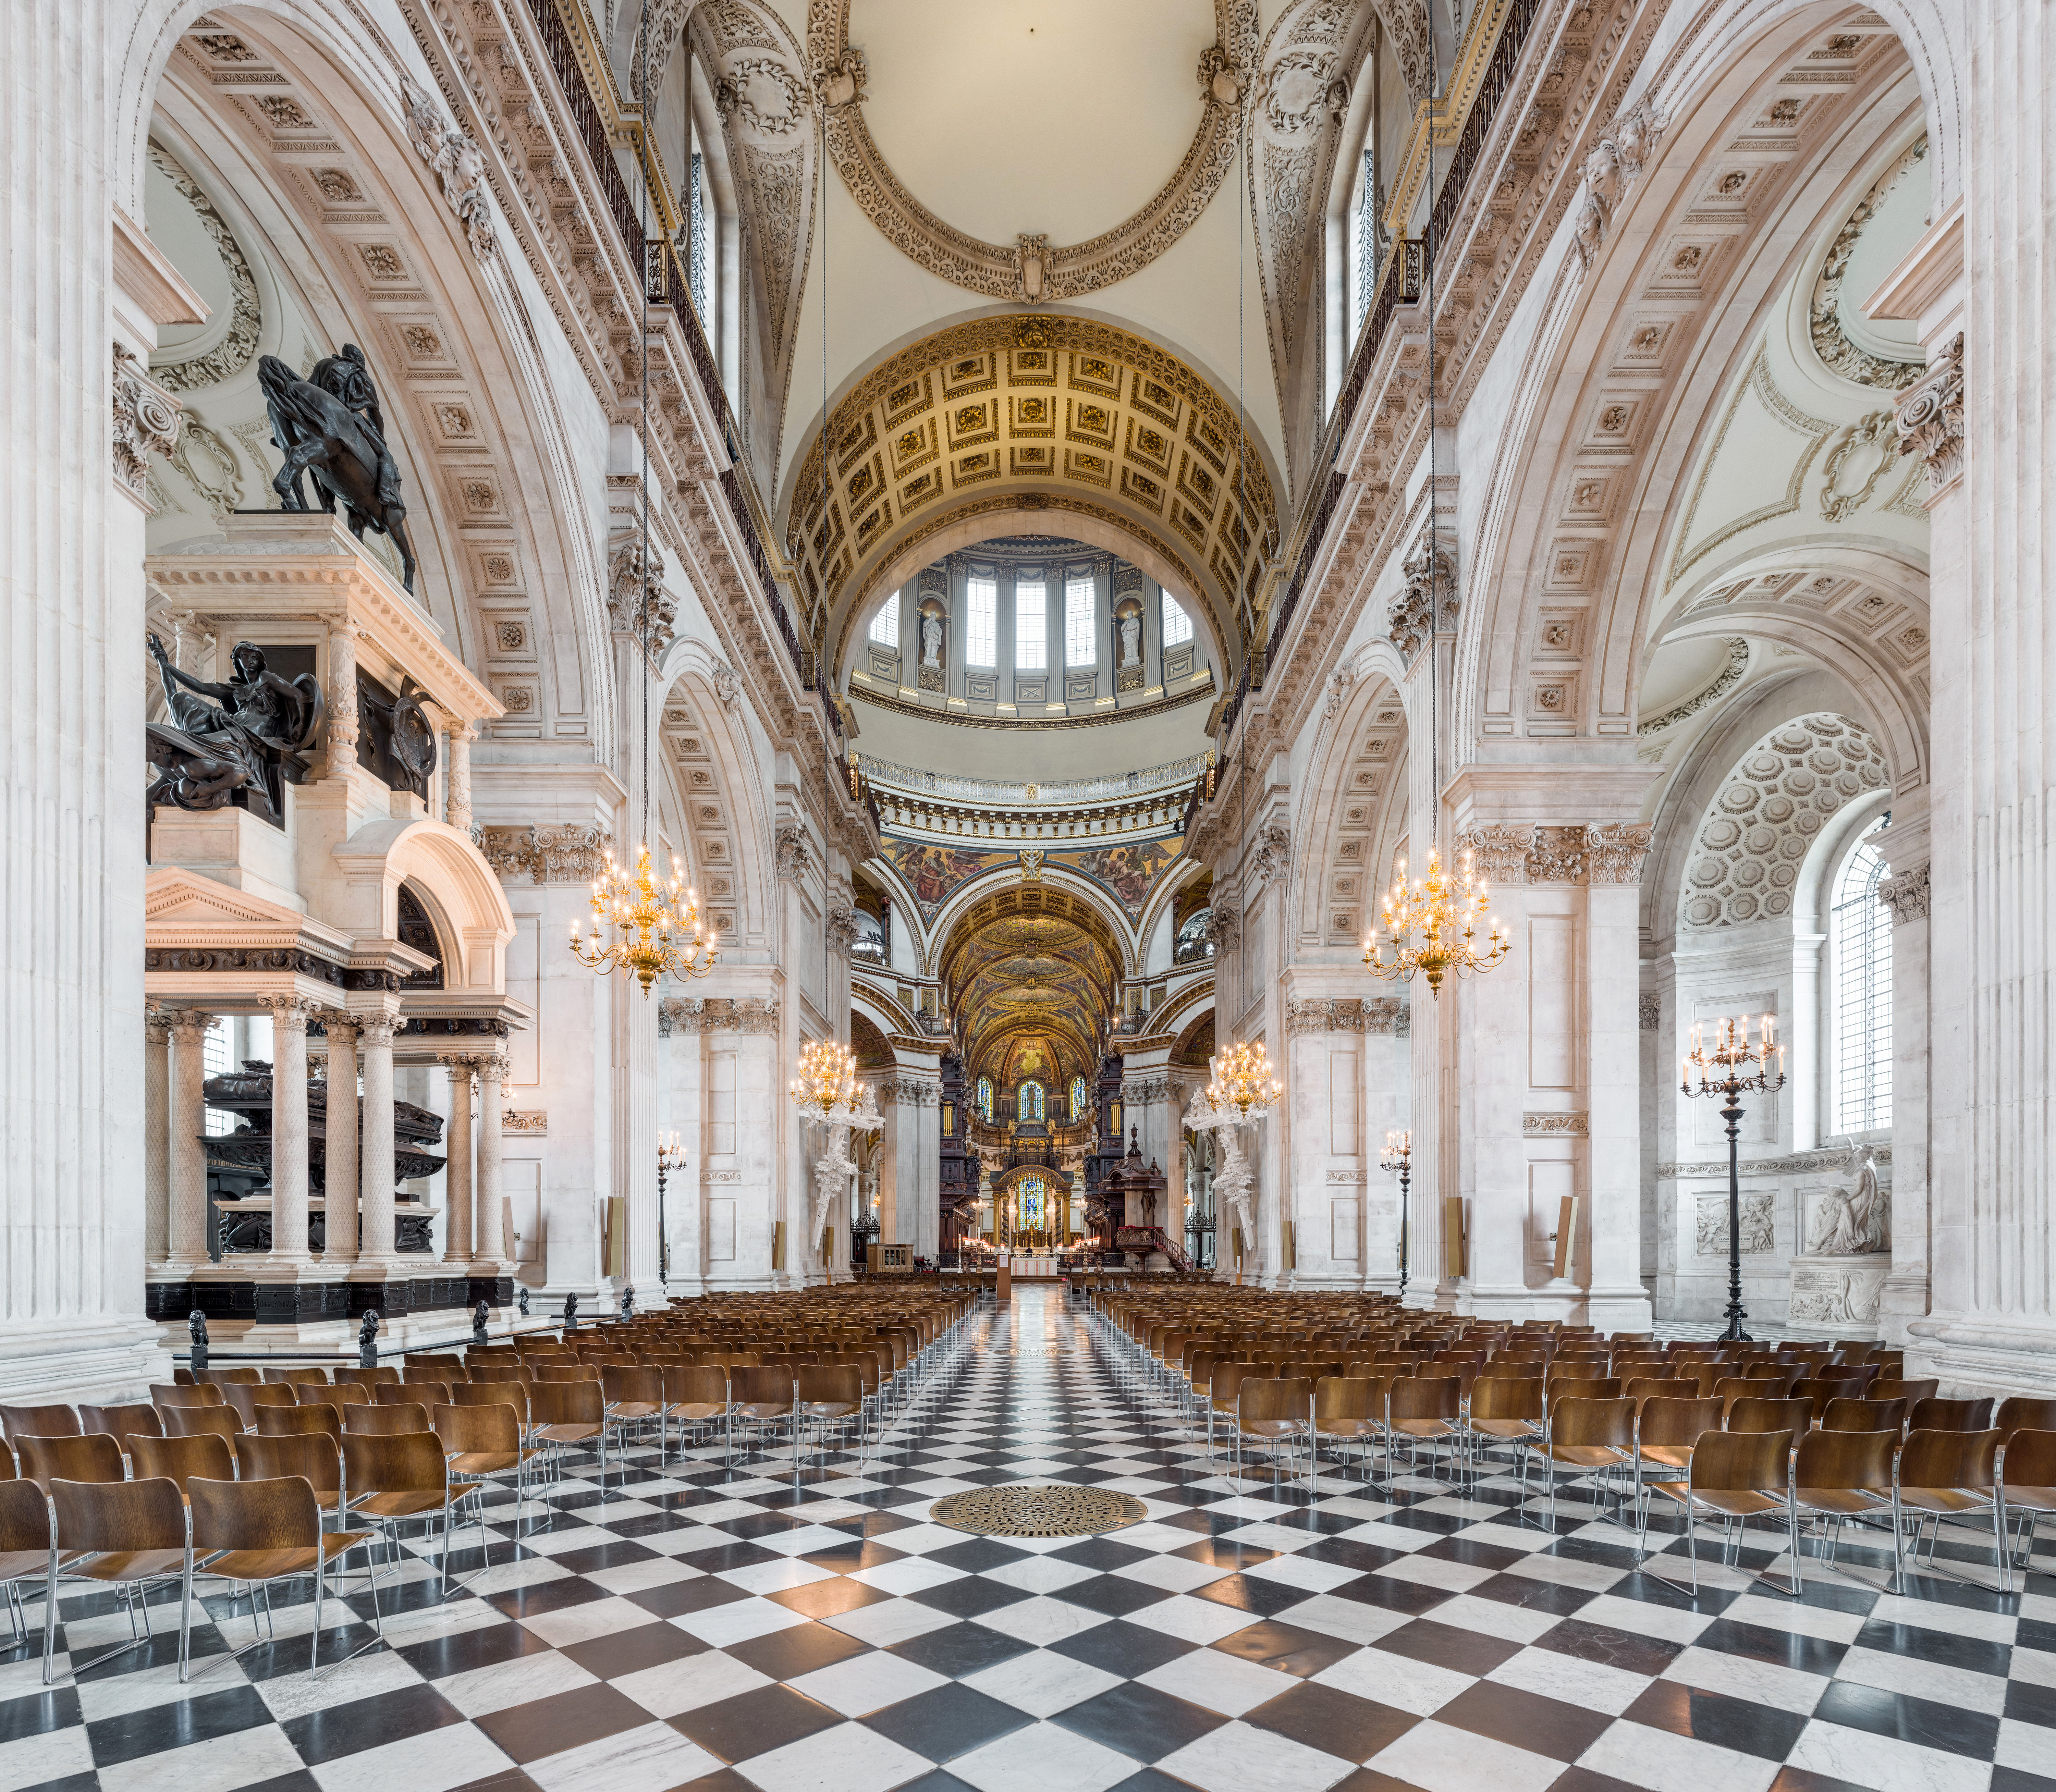 File:St Paul's Cathedral Nave, London, UK - Diliff.jpg - Wikipedia